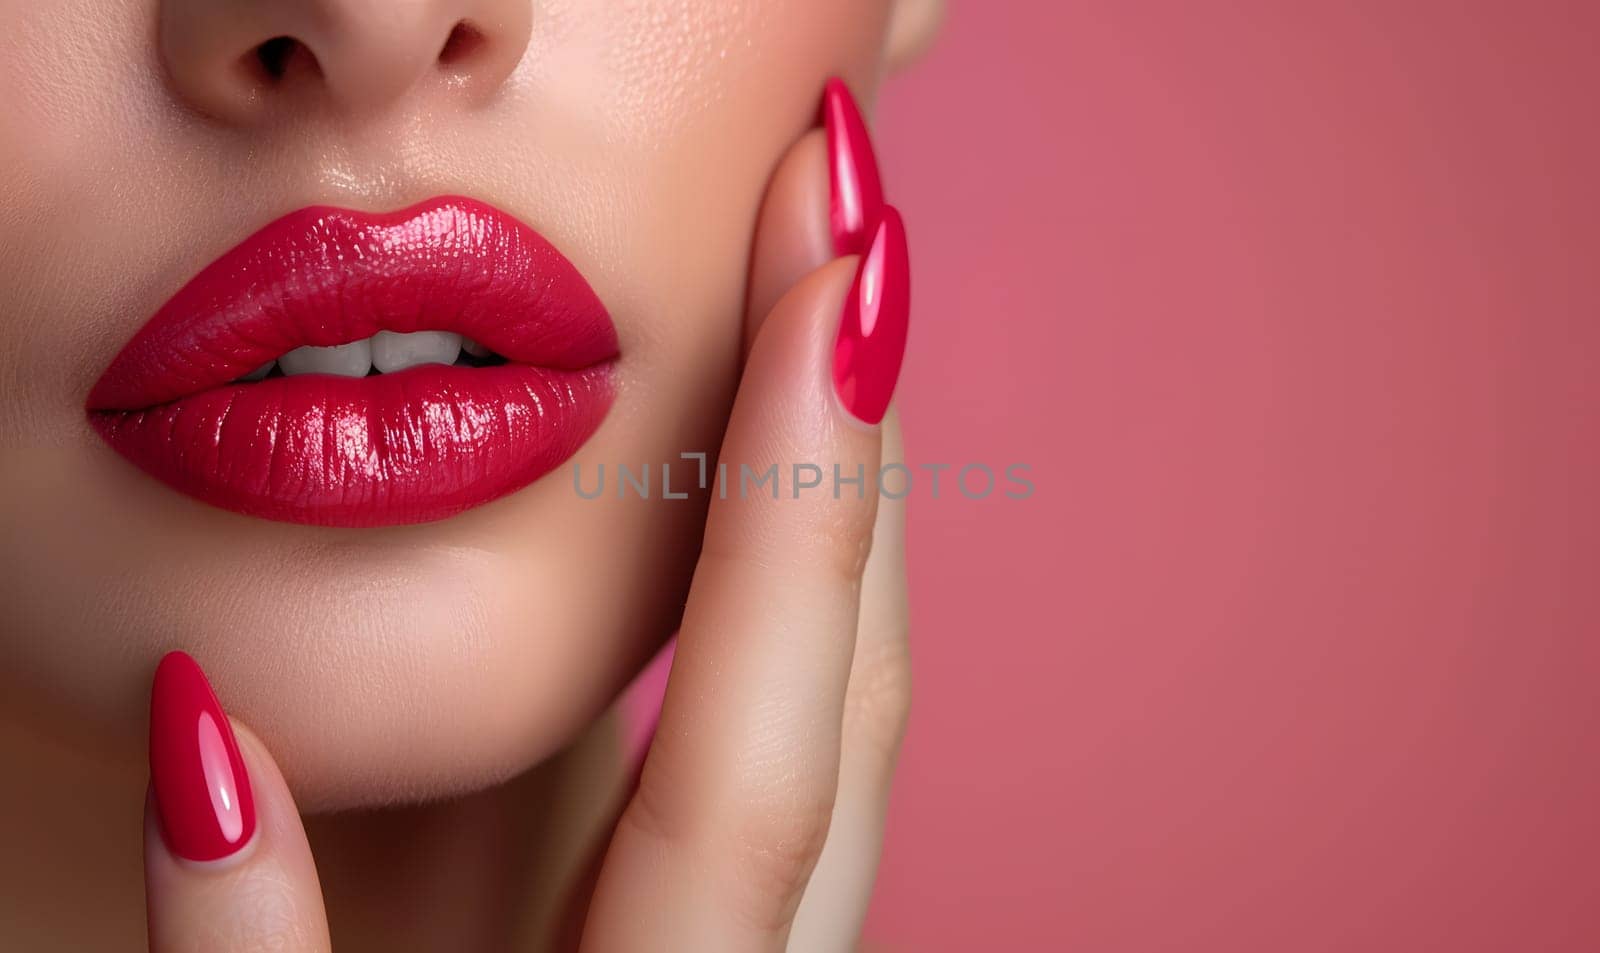 Closeup of a womans face showcasing red lipstick, nails, and perfectly applied cosmetics. Her happy expression highlights her bright red lips, defined eyelashes, and flawless eye makeup